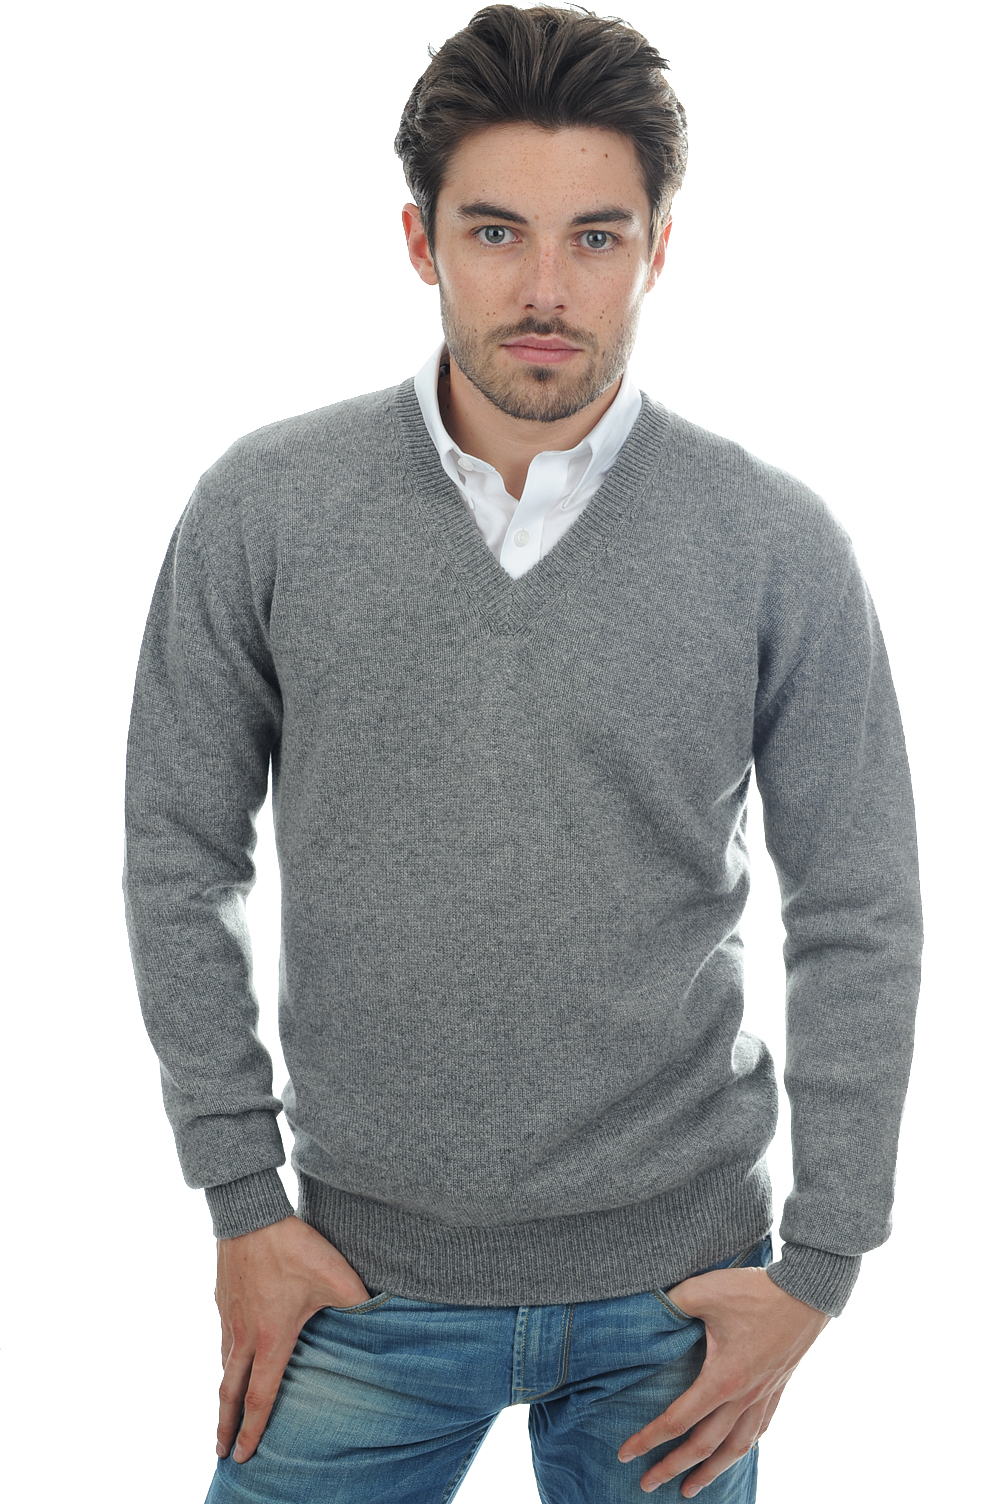 Cachemire pull homme hippolyte 4f gris chine 4xl